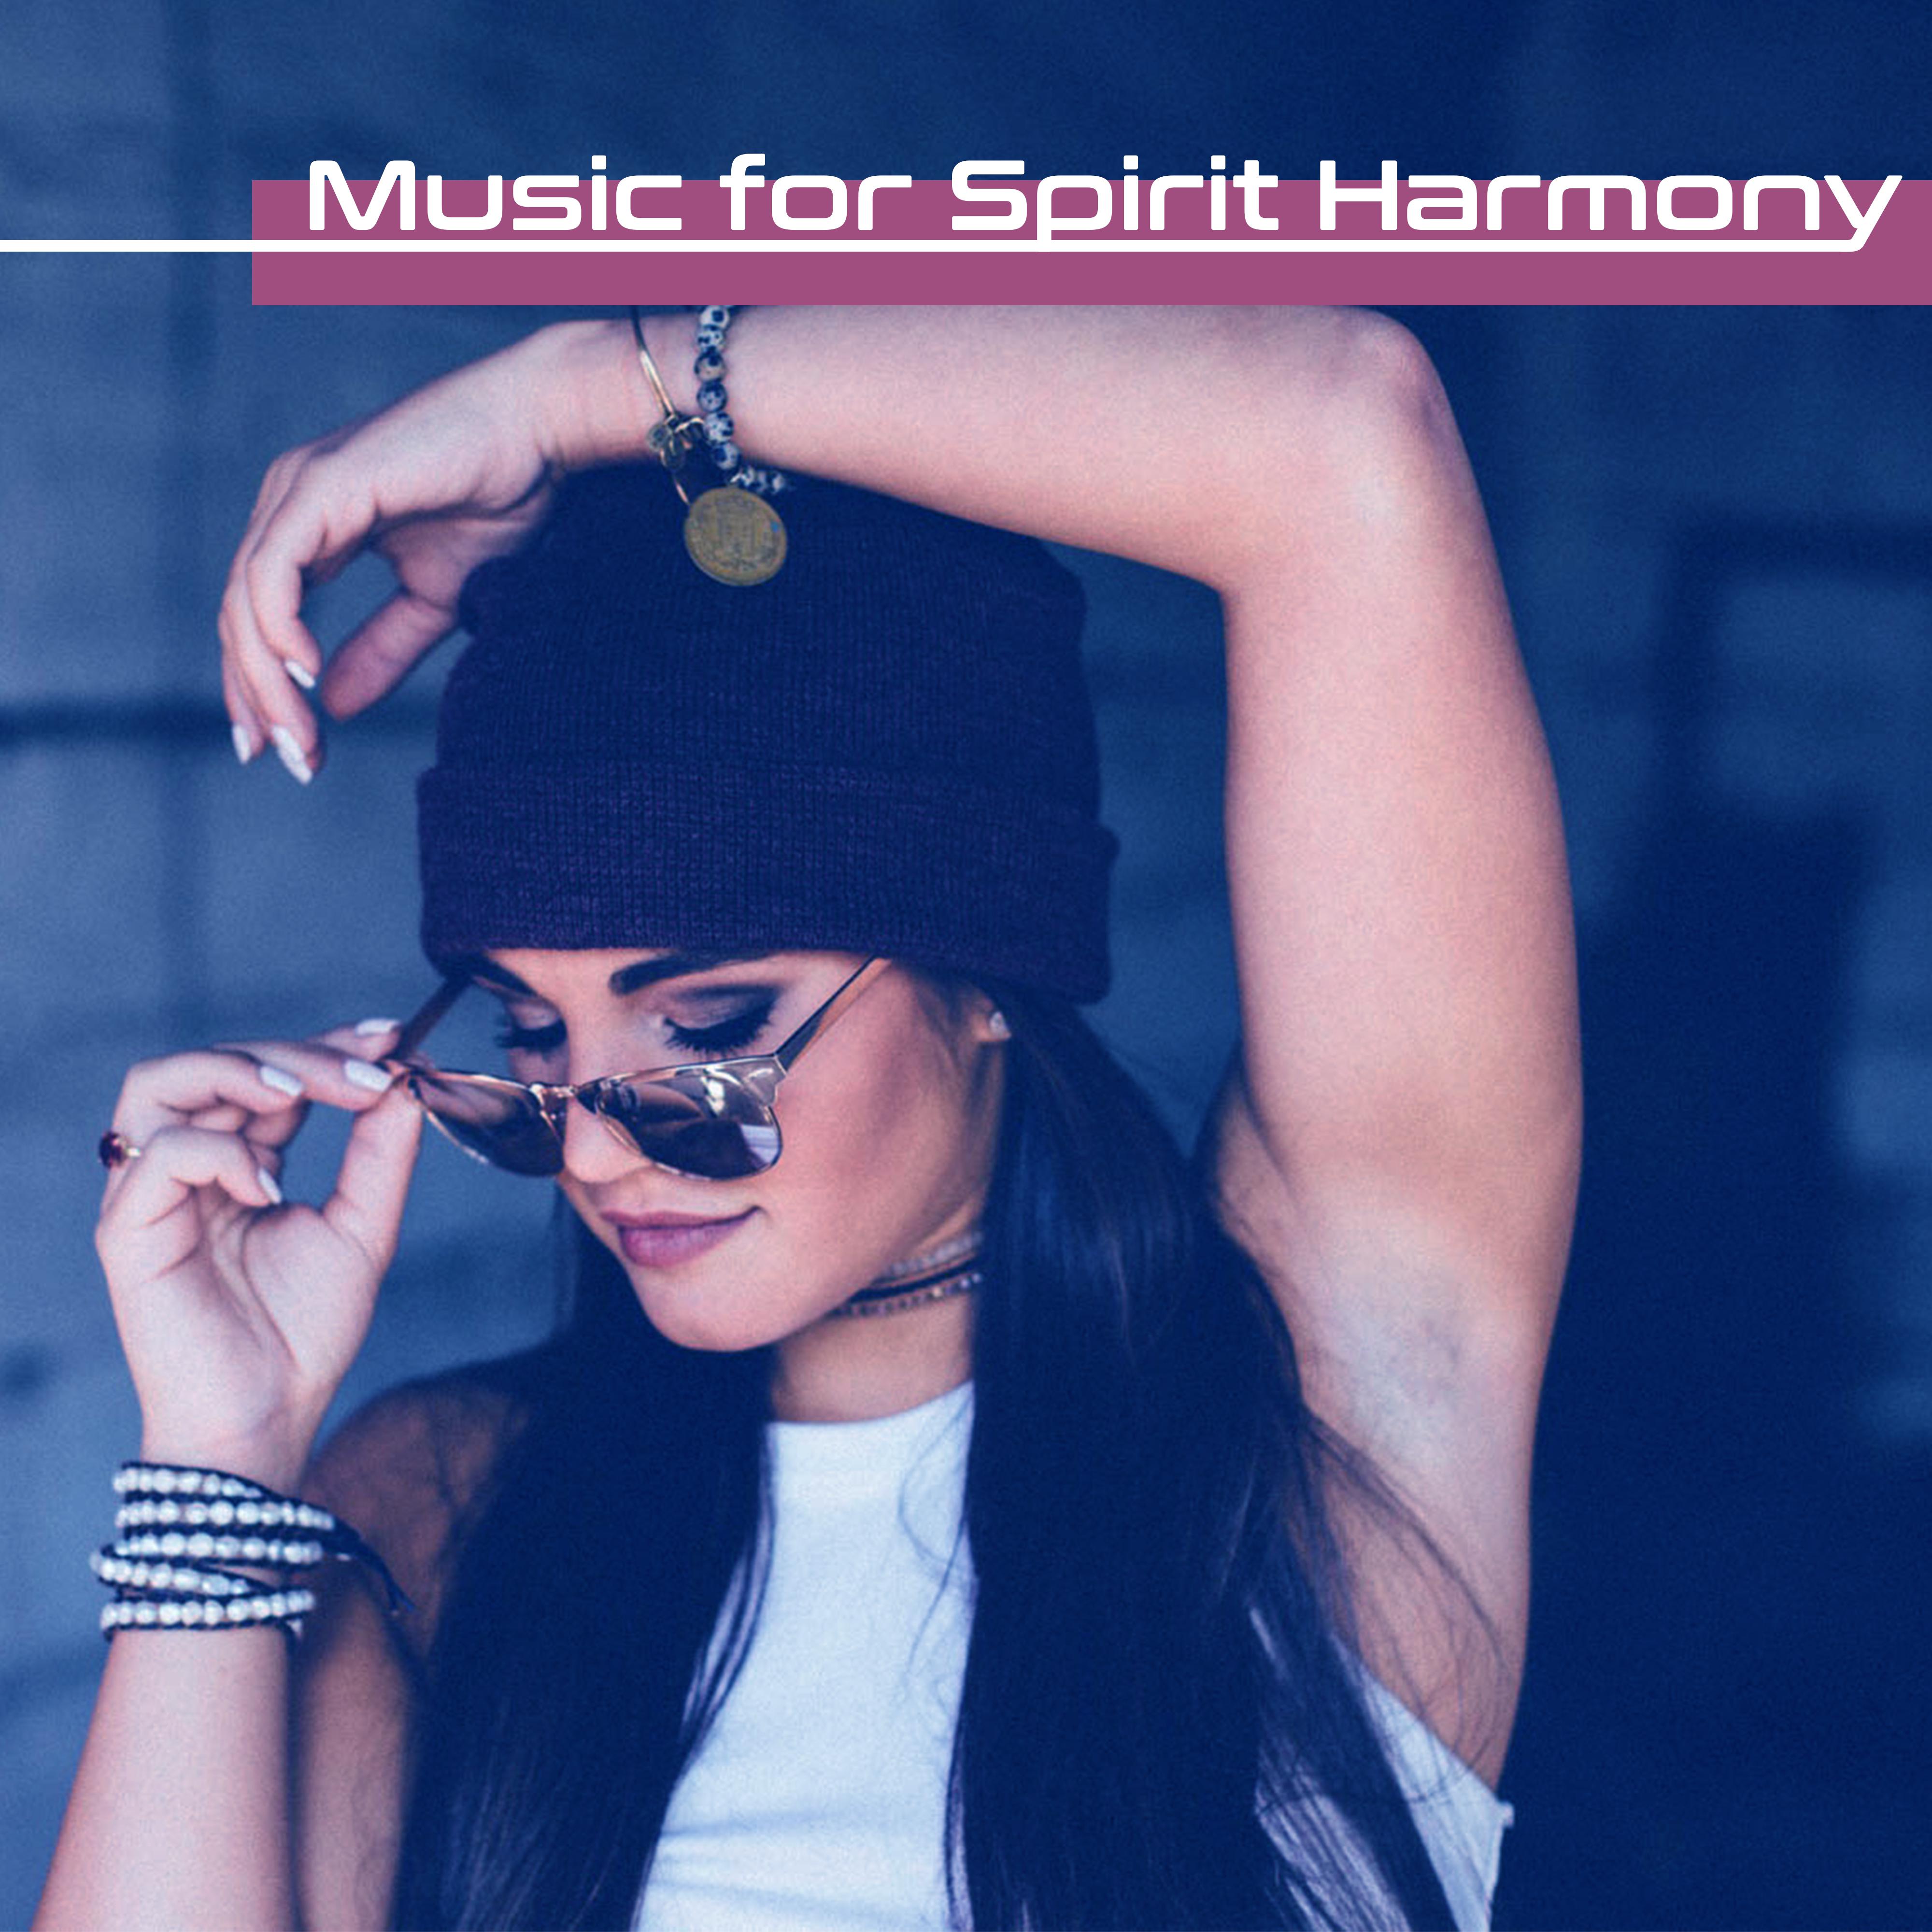 Music for Spirit Harmony – Most Relaxing New Age Music, Sounds to Calm Down, Rest a Bit